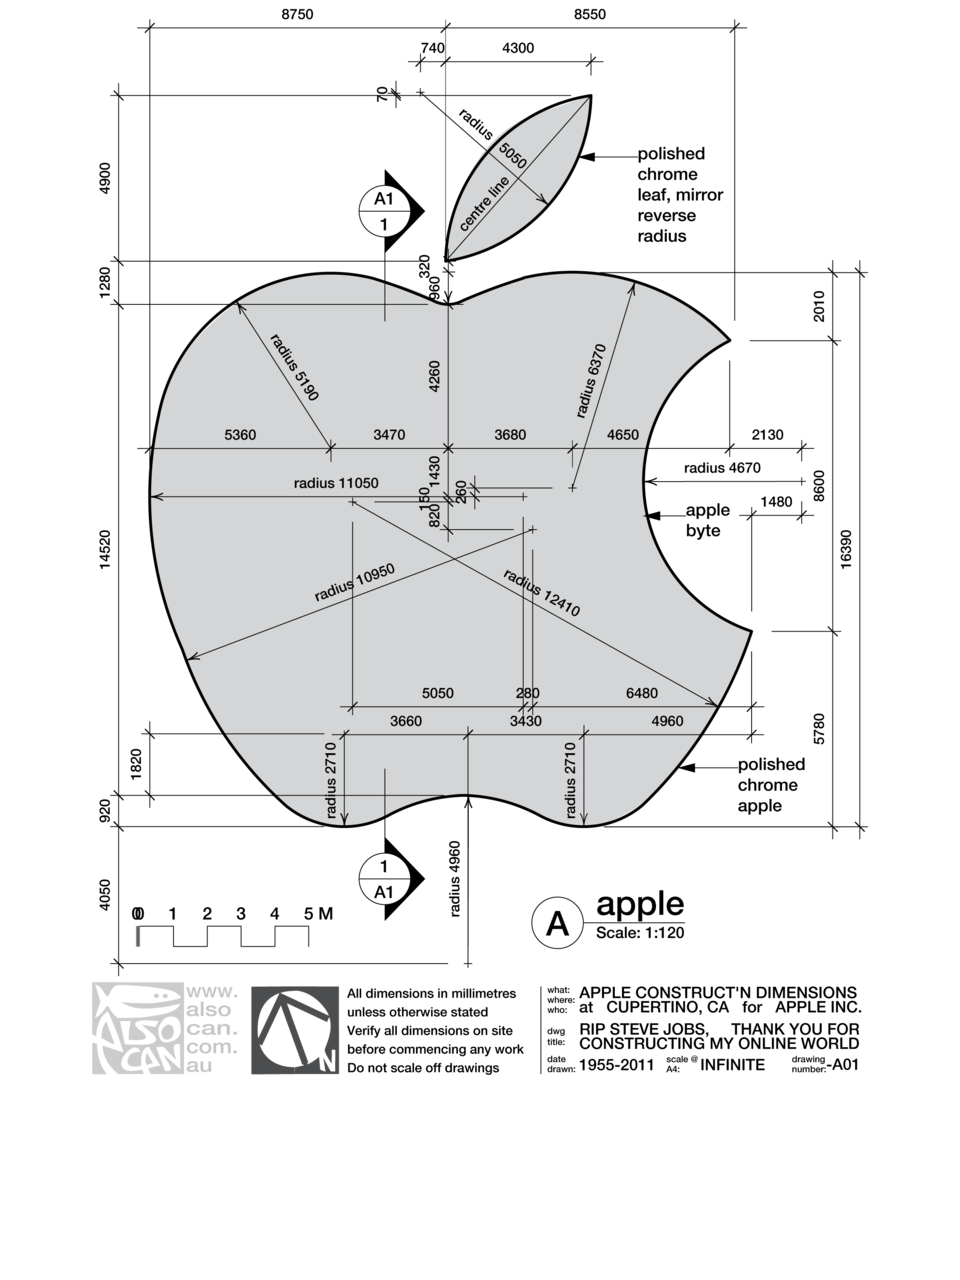 auto cad for mac student